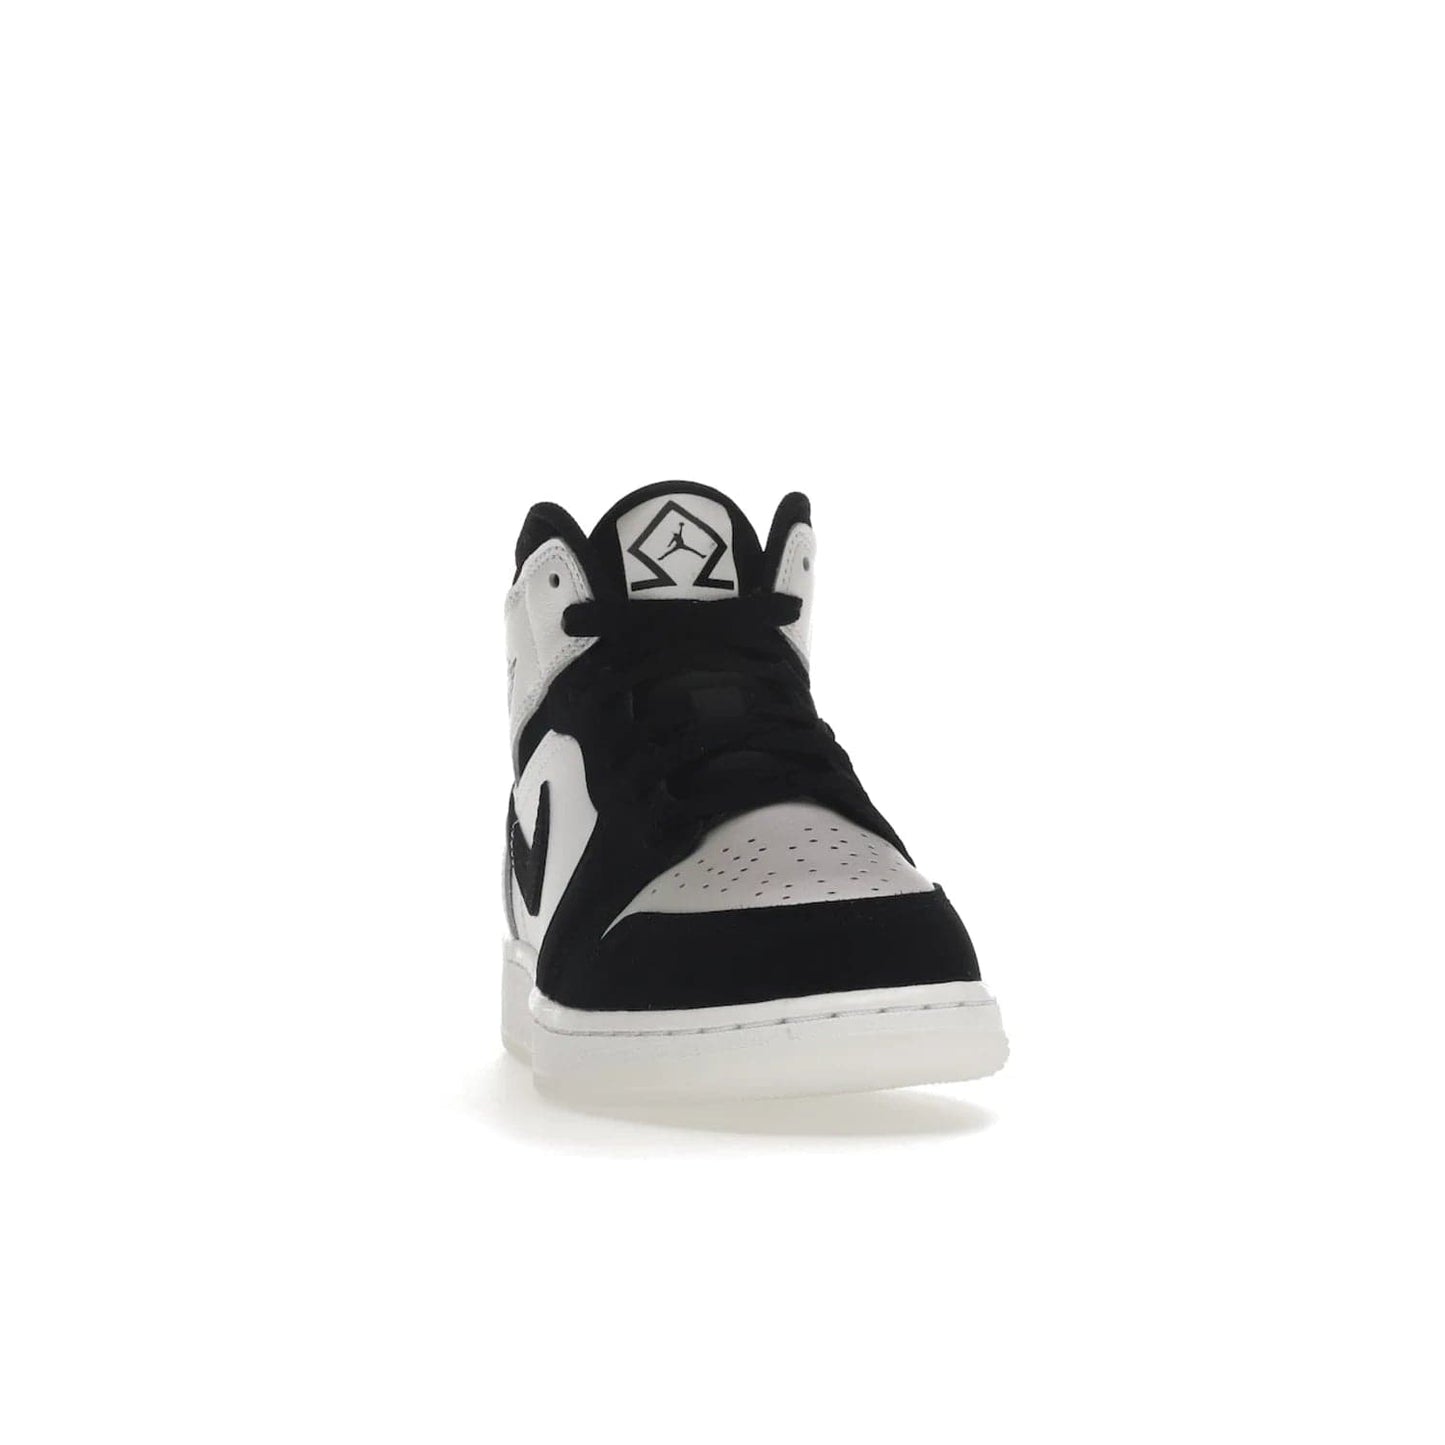 Jordan 1 Mid Diamond Shorts (GS) - Image 9 - Only at www.BallersClubKickz.com - Get the Jordan 1 Mid Diamond Shorts GS on 9th Feb 2022! Features a white, black & suede design with nylon tongue, stamped wings logo, rubber midsole & outsole. Only $100!